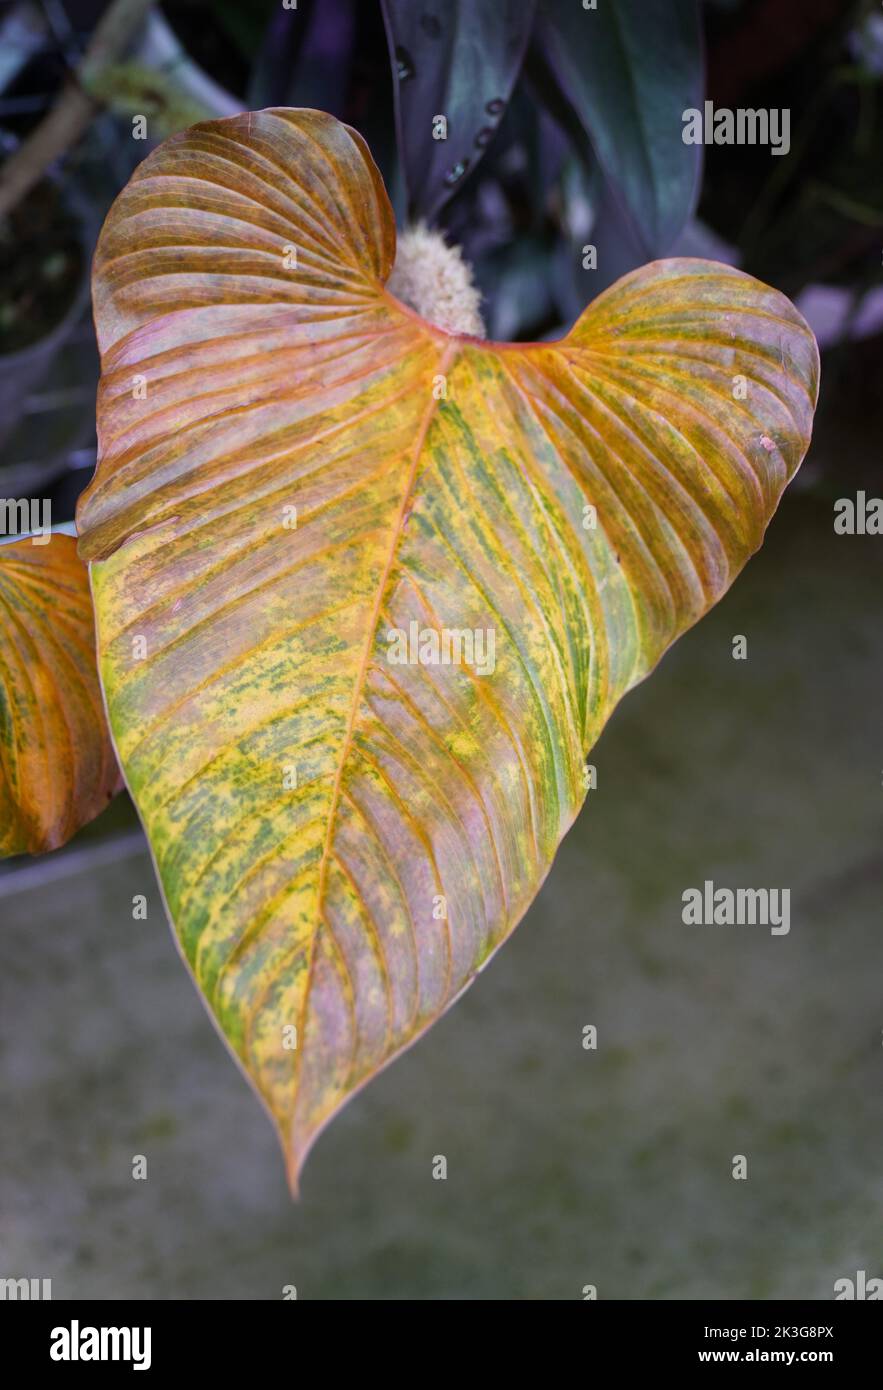 Close up of a yellowing leaf of Philodendron Serpens, a rare tropical plant Stock Photo